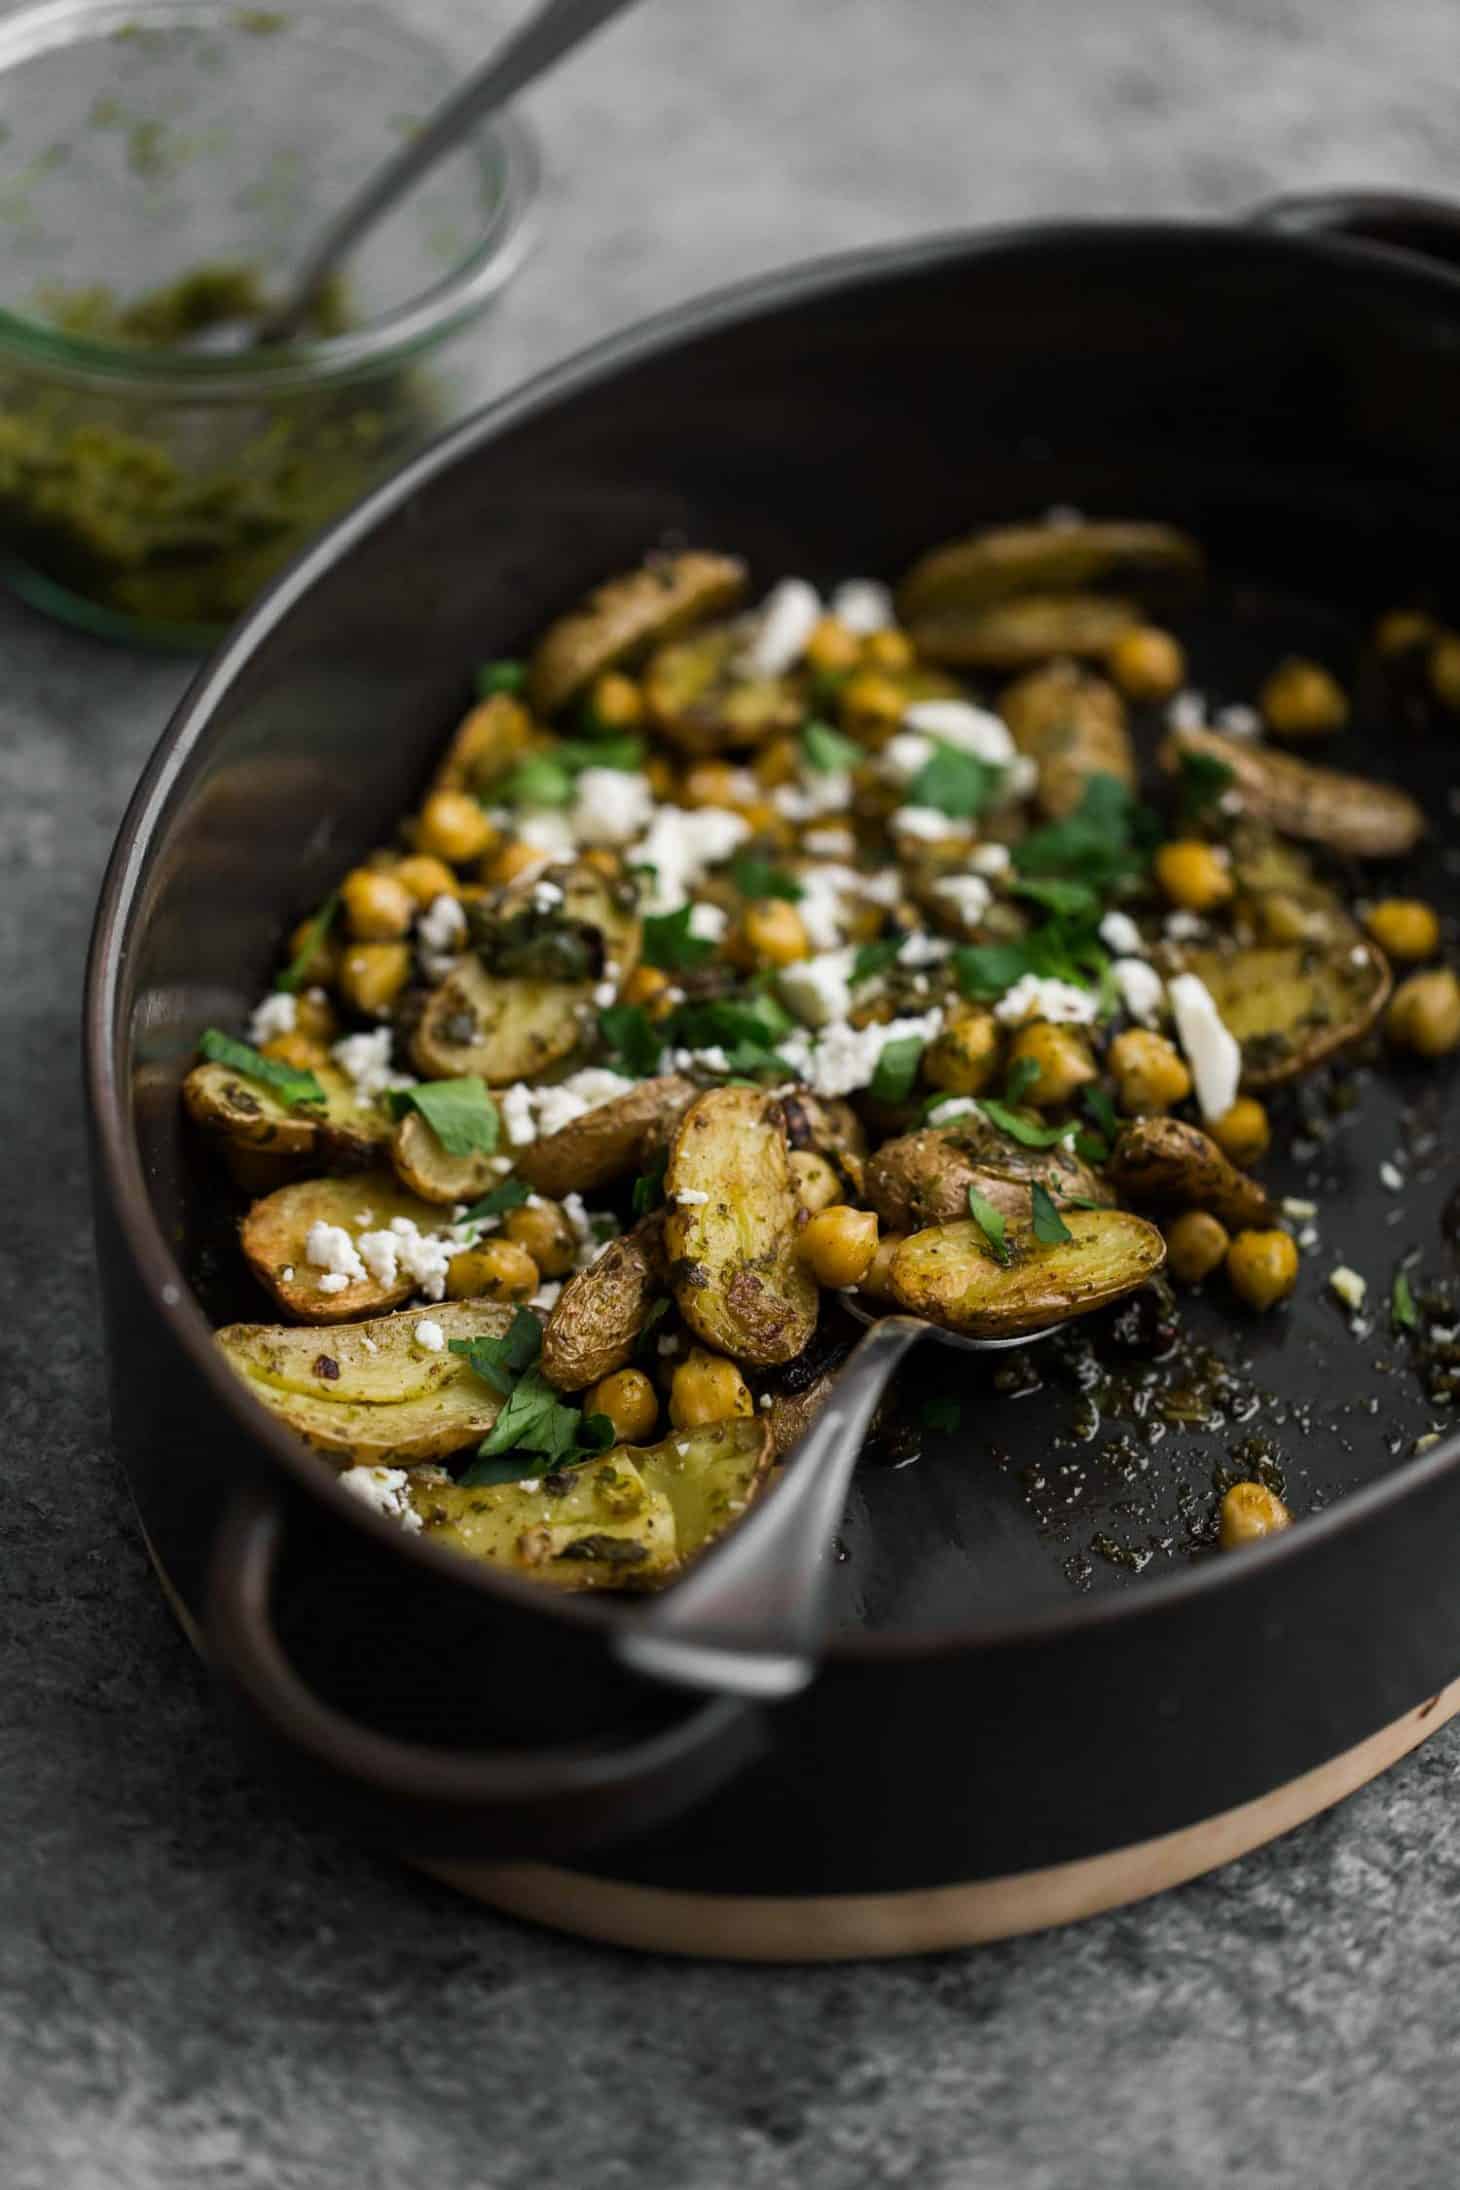 Roasted potatoes and chickpeas with green harissa.